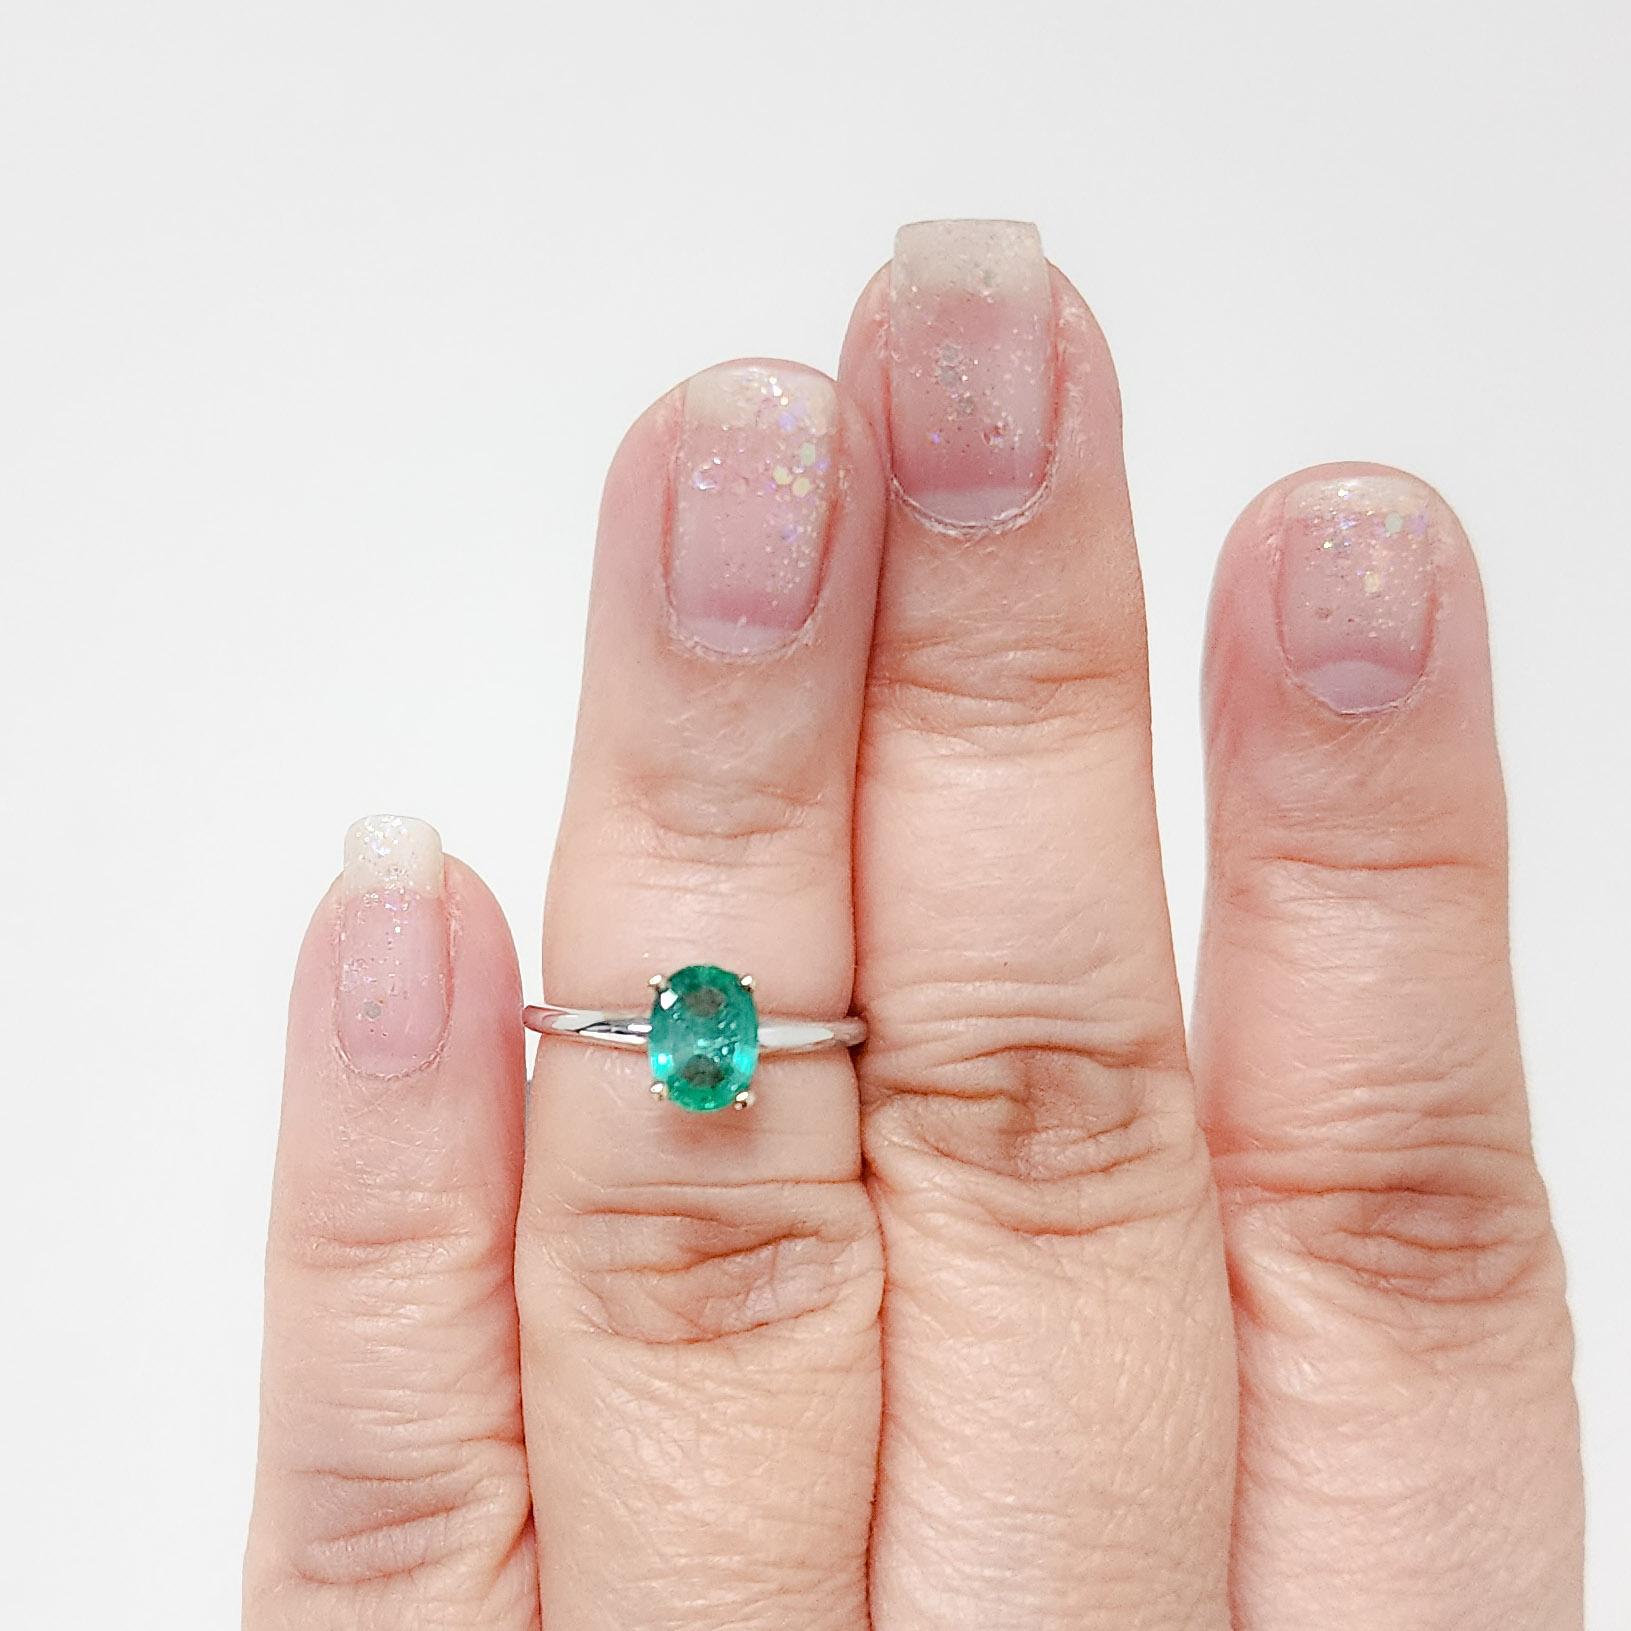 Beautiful 0.94 ct. emerald oval in a handmade 14k white gold ring.  Ring size 6.